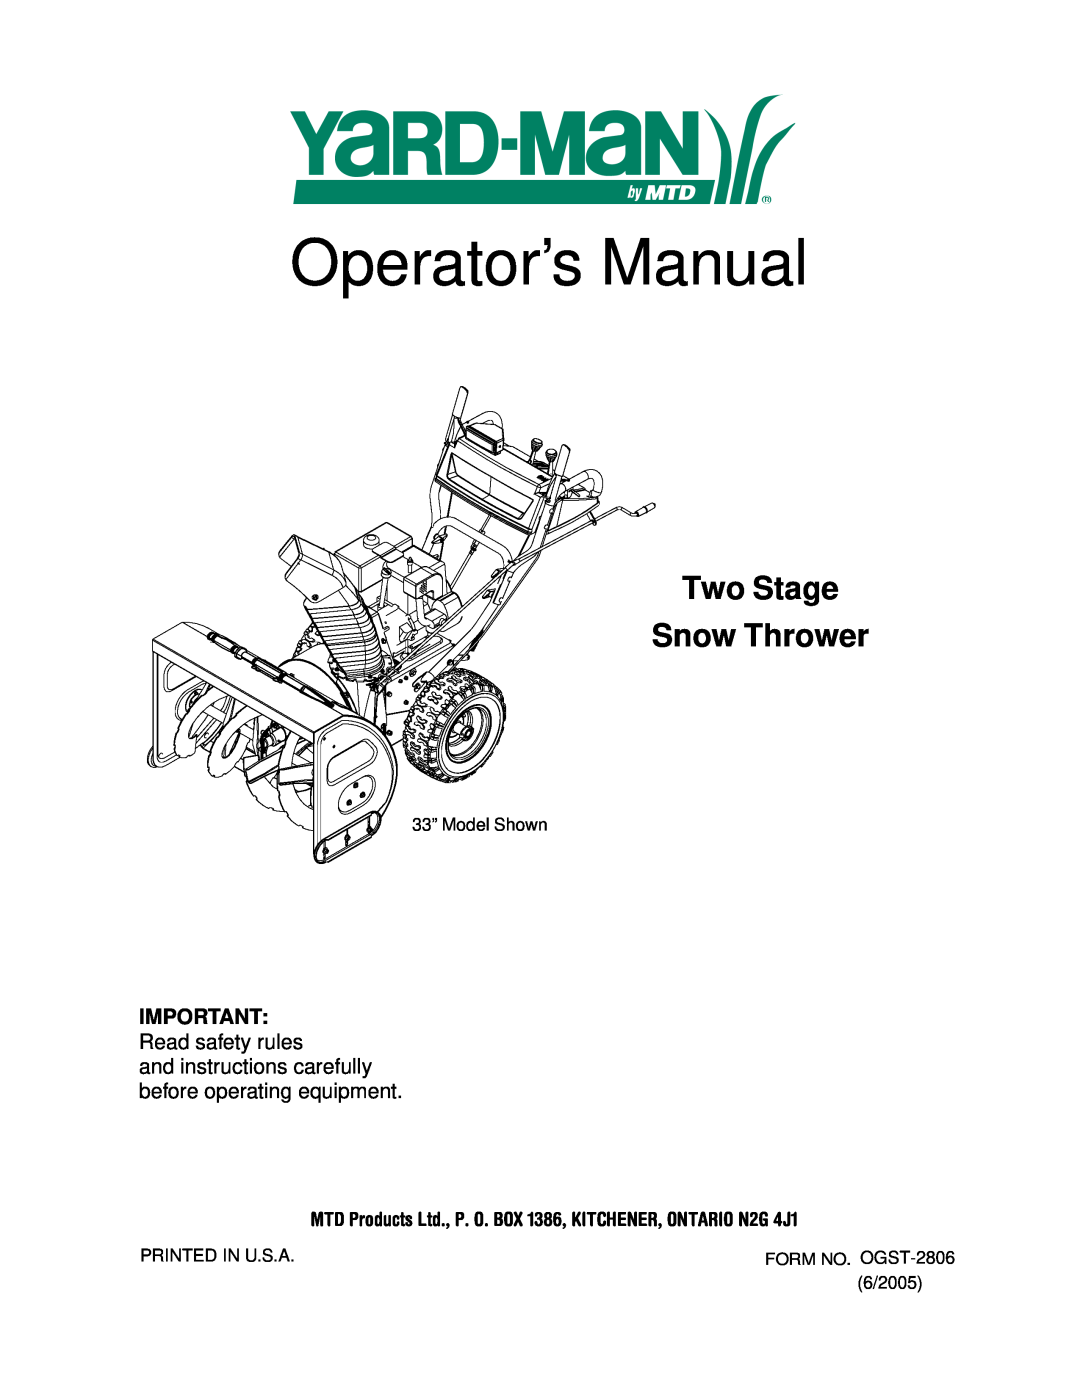 Yard-Man OGST-2806 manual Operator’s Manual, Two Stage Snow Thrower, IMPORTANT Read safety rules 